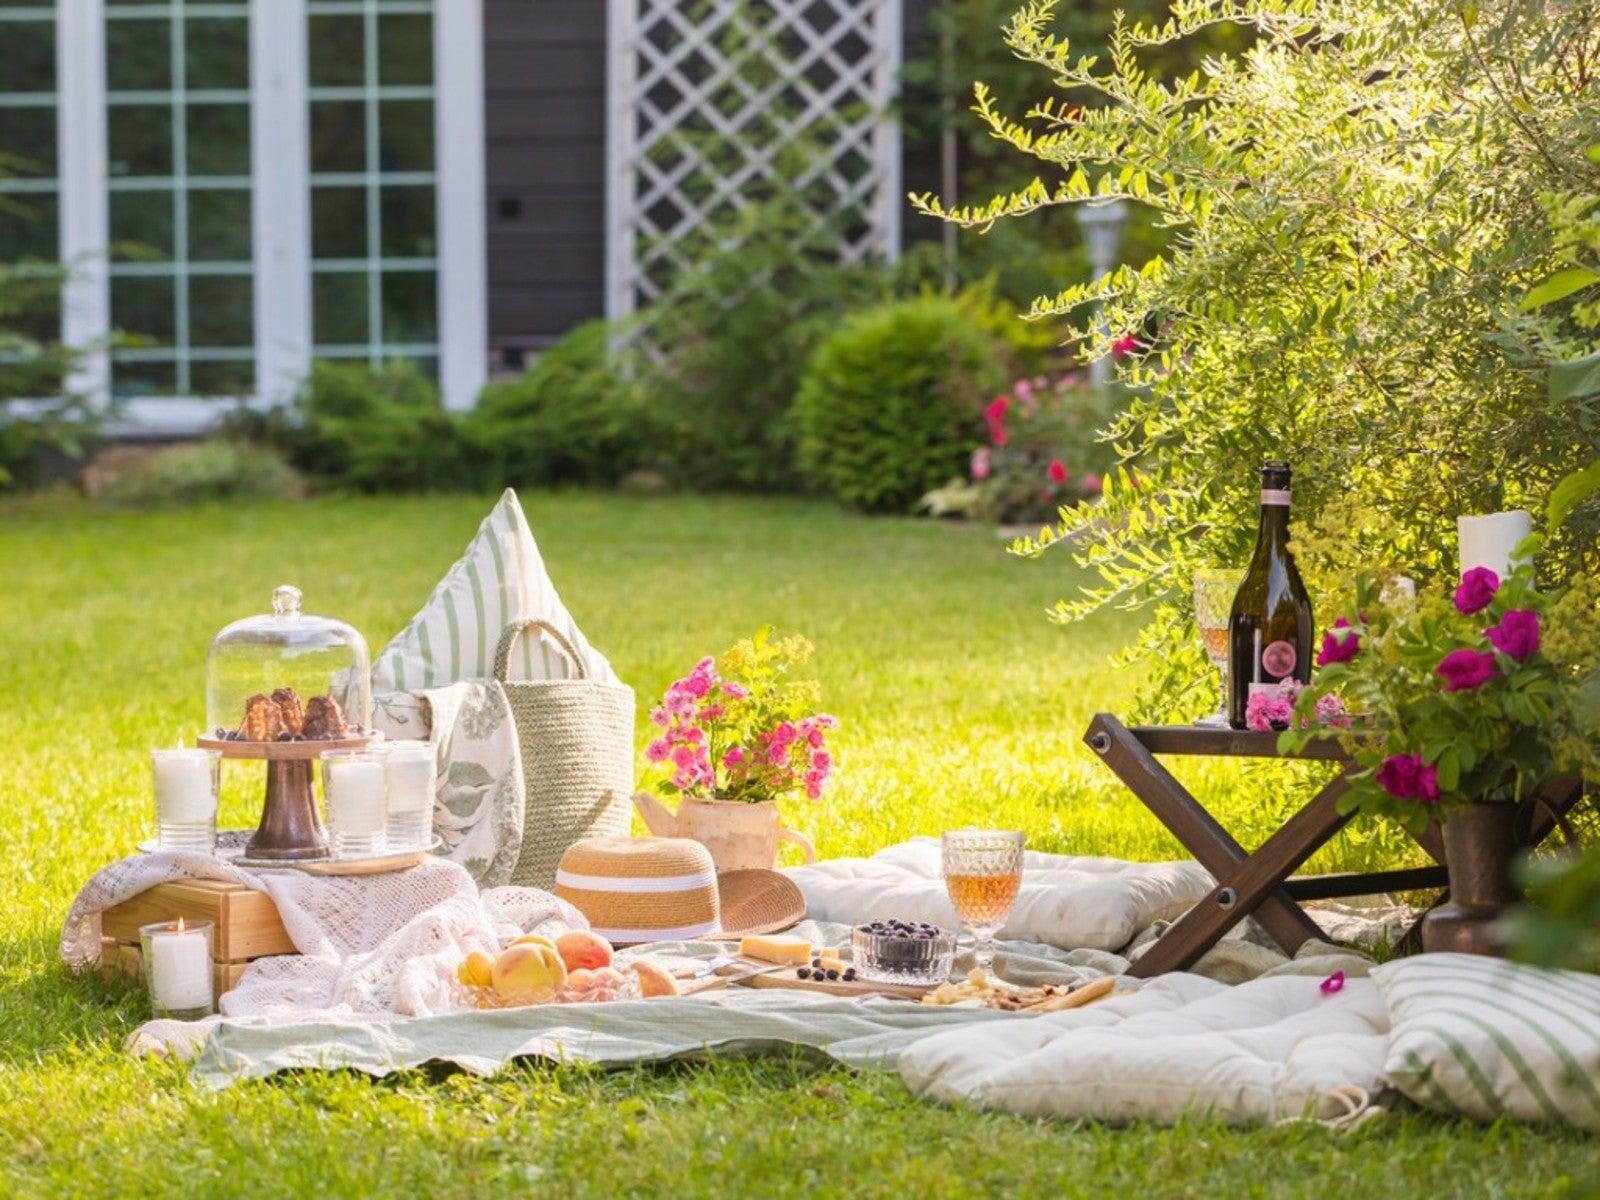 A beautiful picnic laid out on a lawn